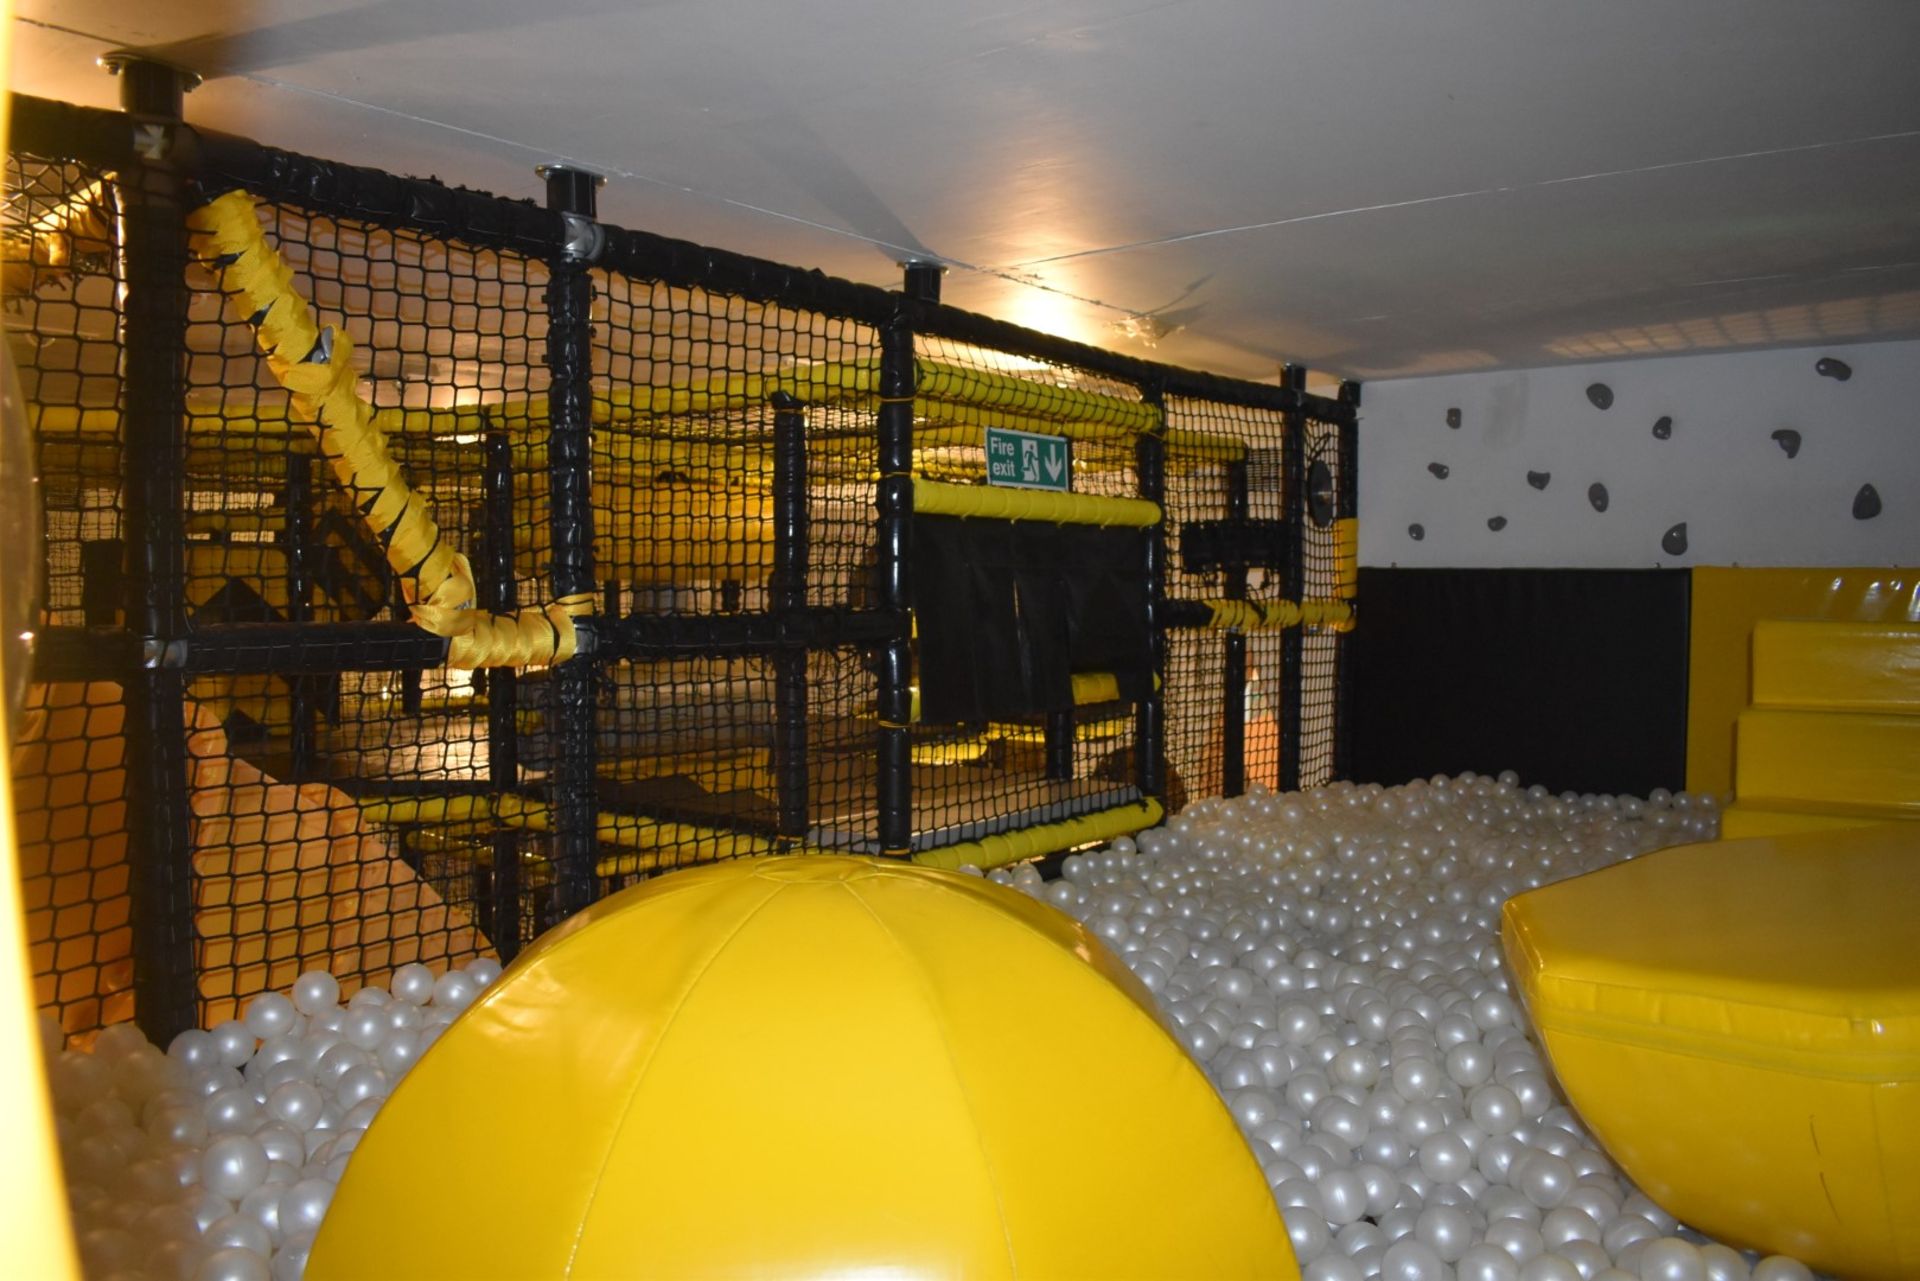 1 x Multilevel Childrens Soft Playcentre With Climbing Tubes, Slide, Ball Pits, Crazy Mirrors and - Image 47 of 65